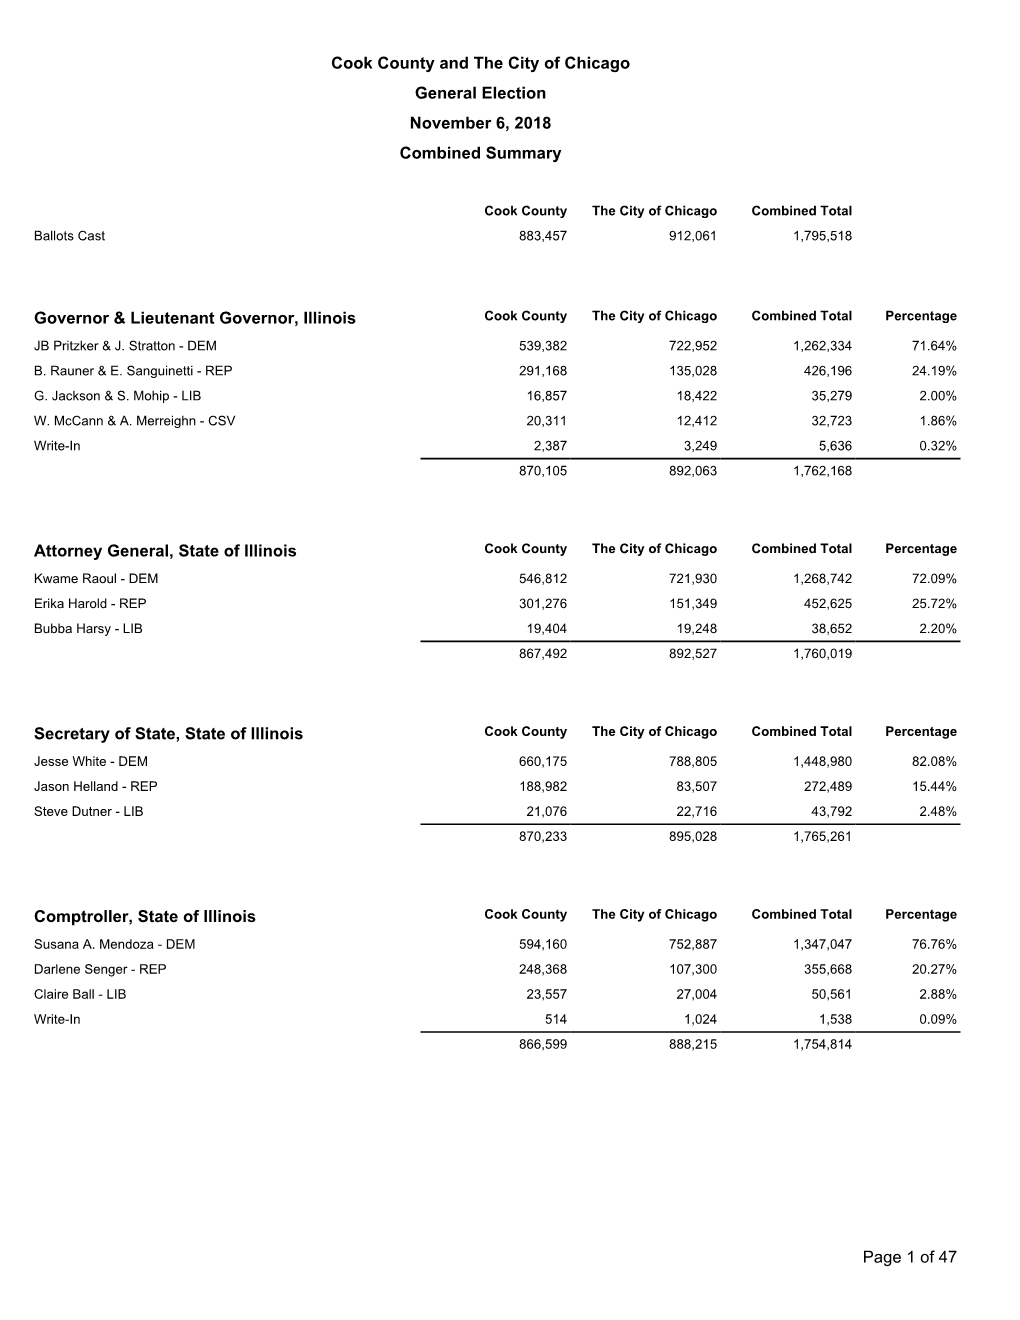 Page 1 of 47 Cook County and the City of Chicago General Election